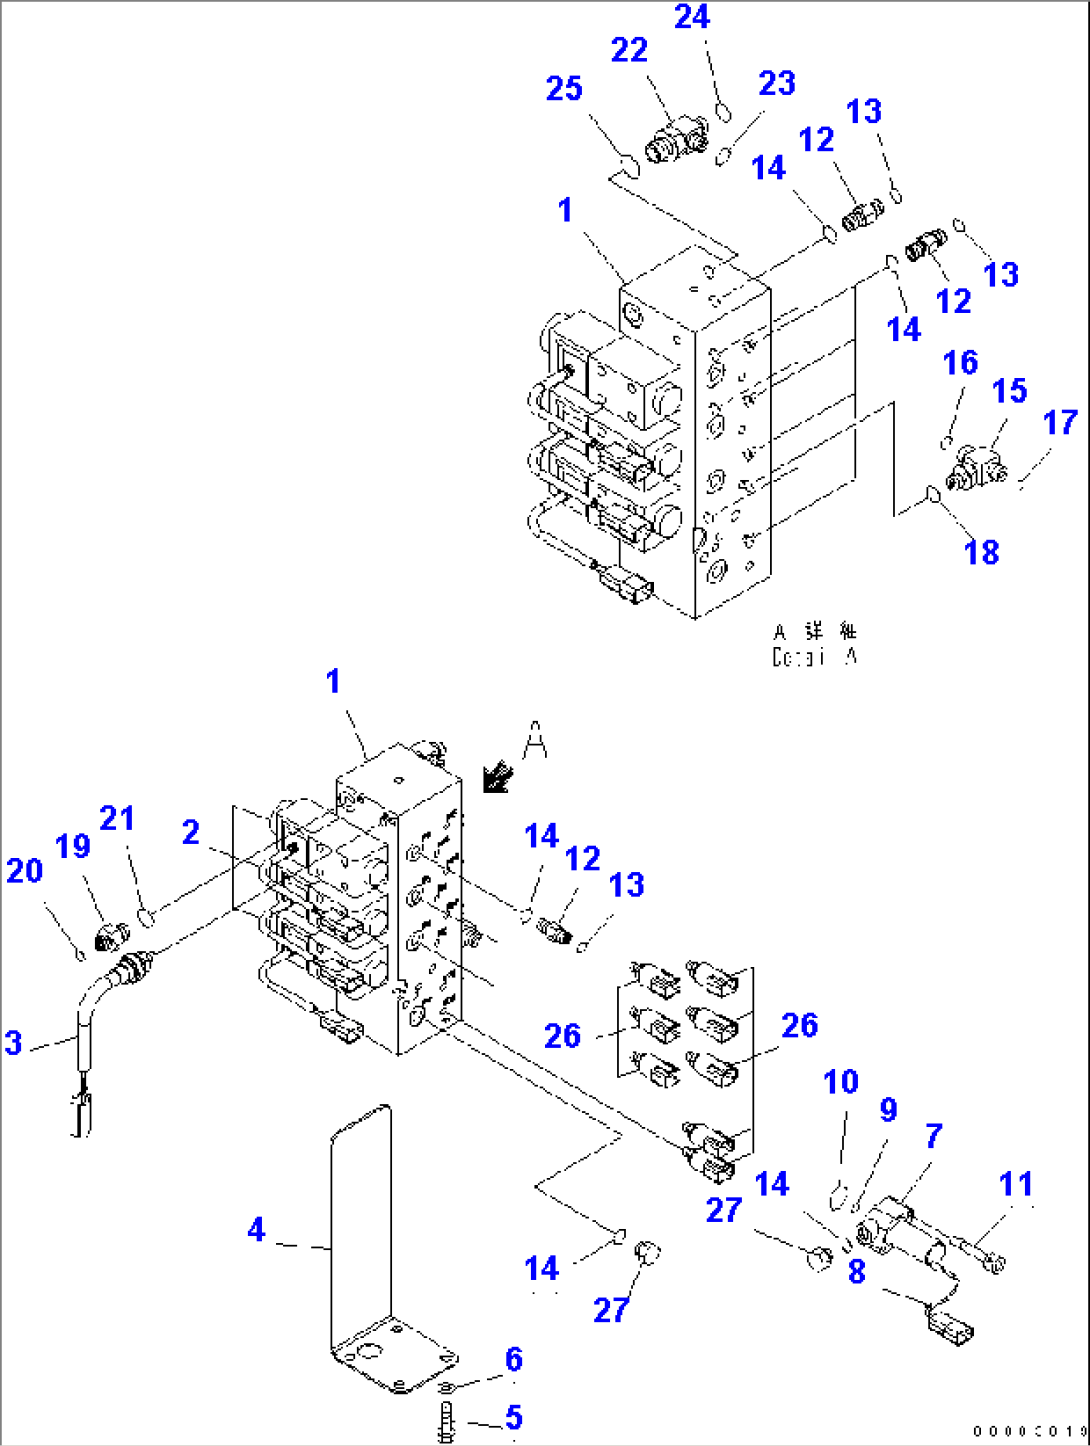 PPC VALVE BLOCK AND CONNECTING PARTS